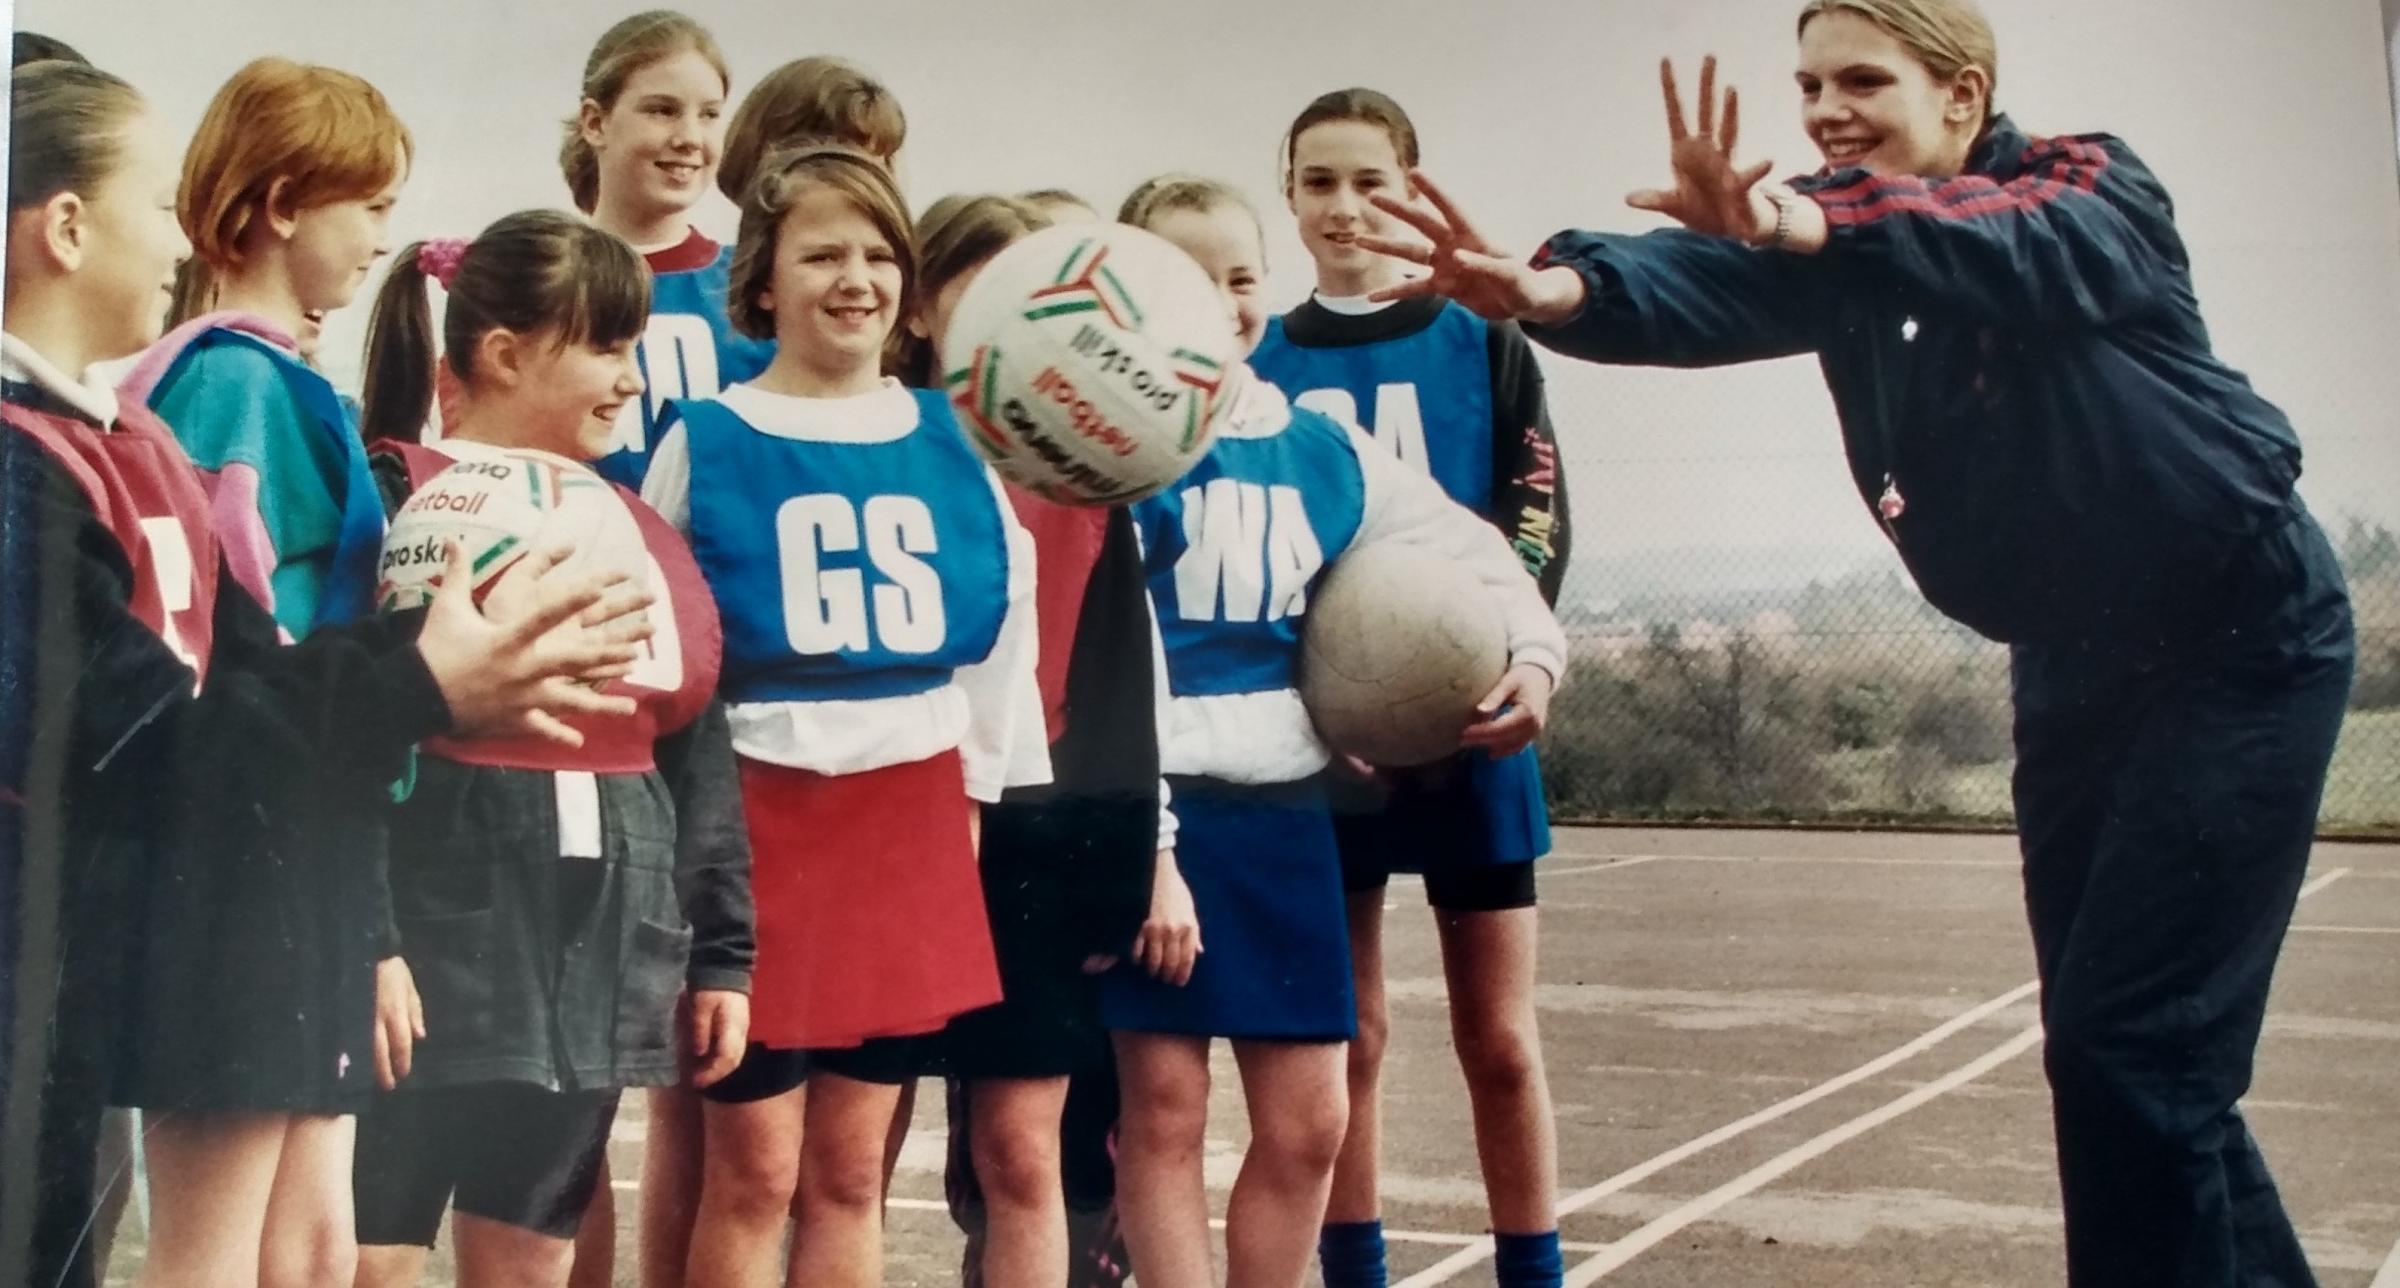 March 1996 and some young netballers are given some passing tips